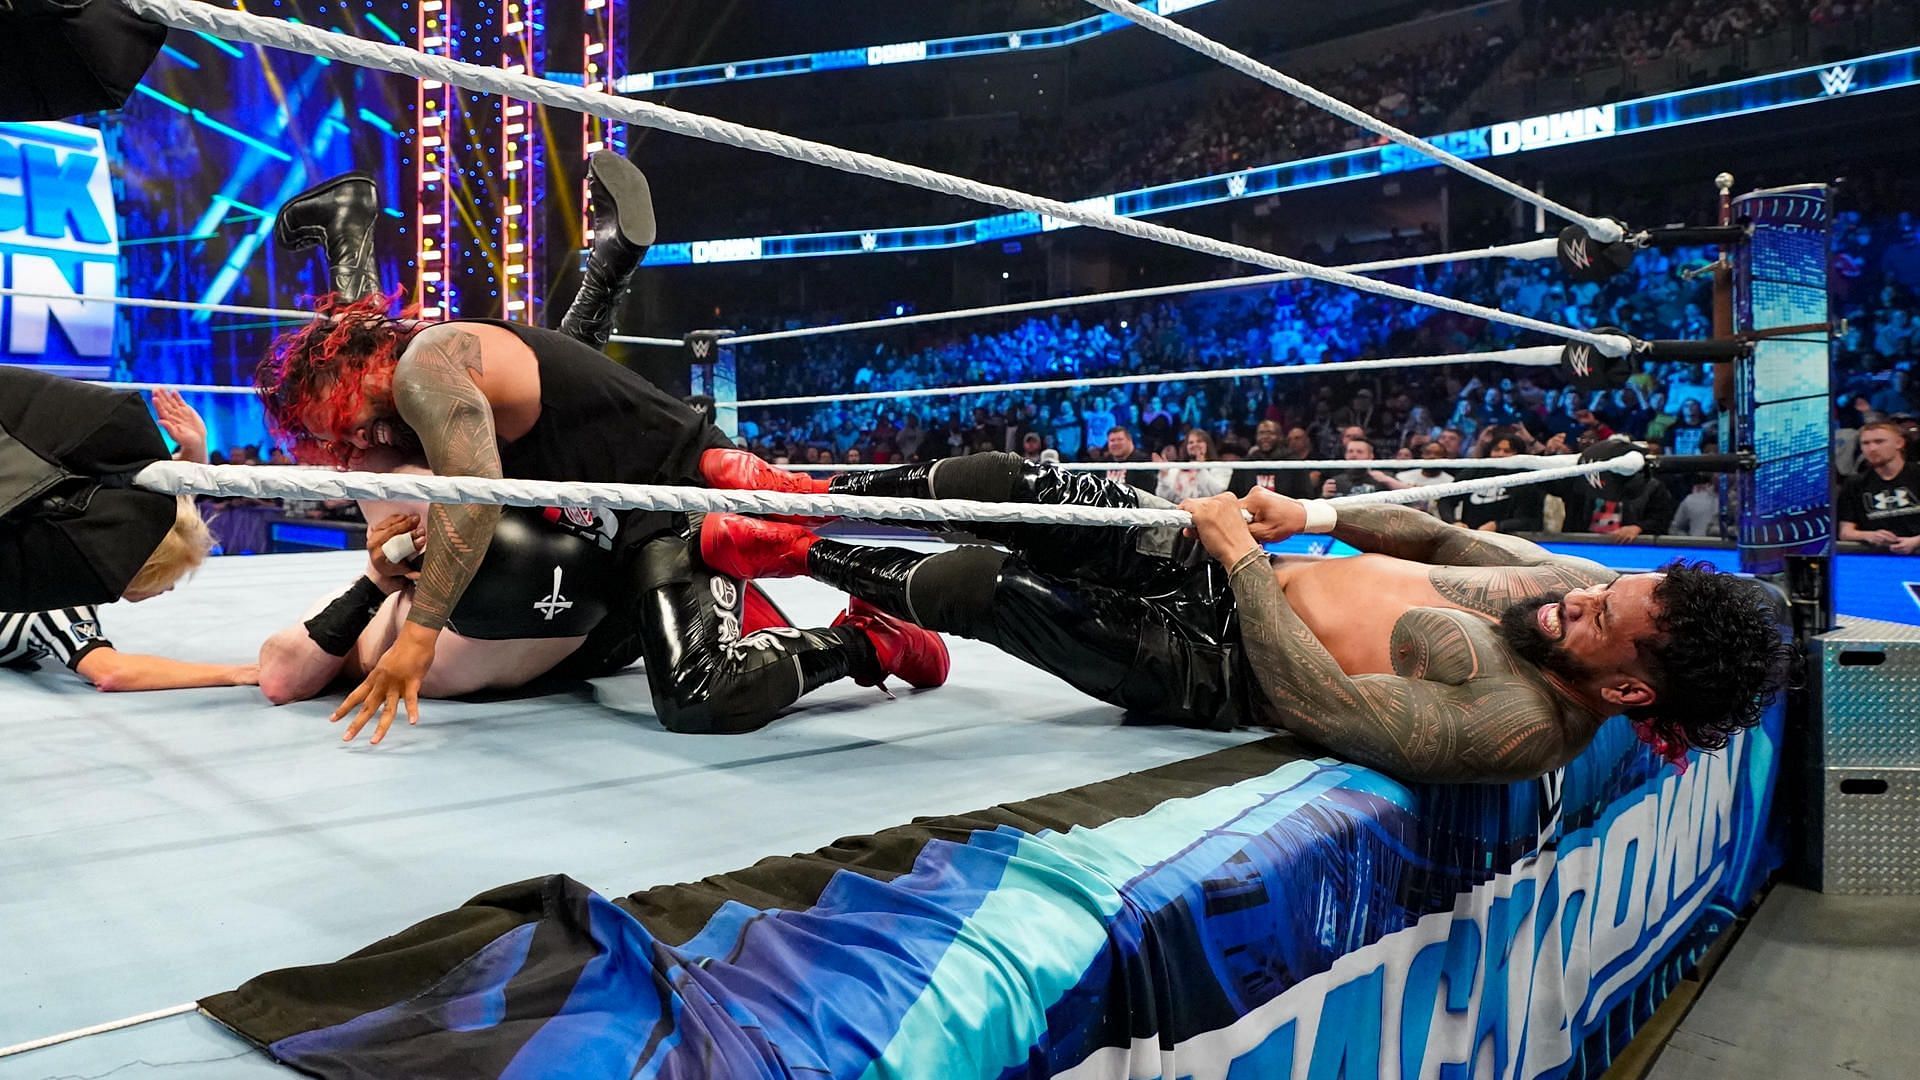 The Usos cheated their way to a win on WWE SmackDown.